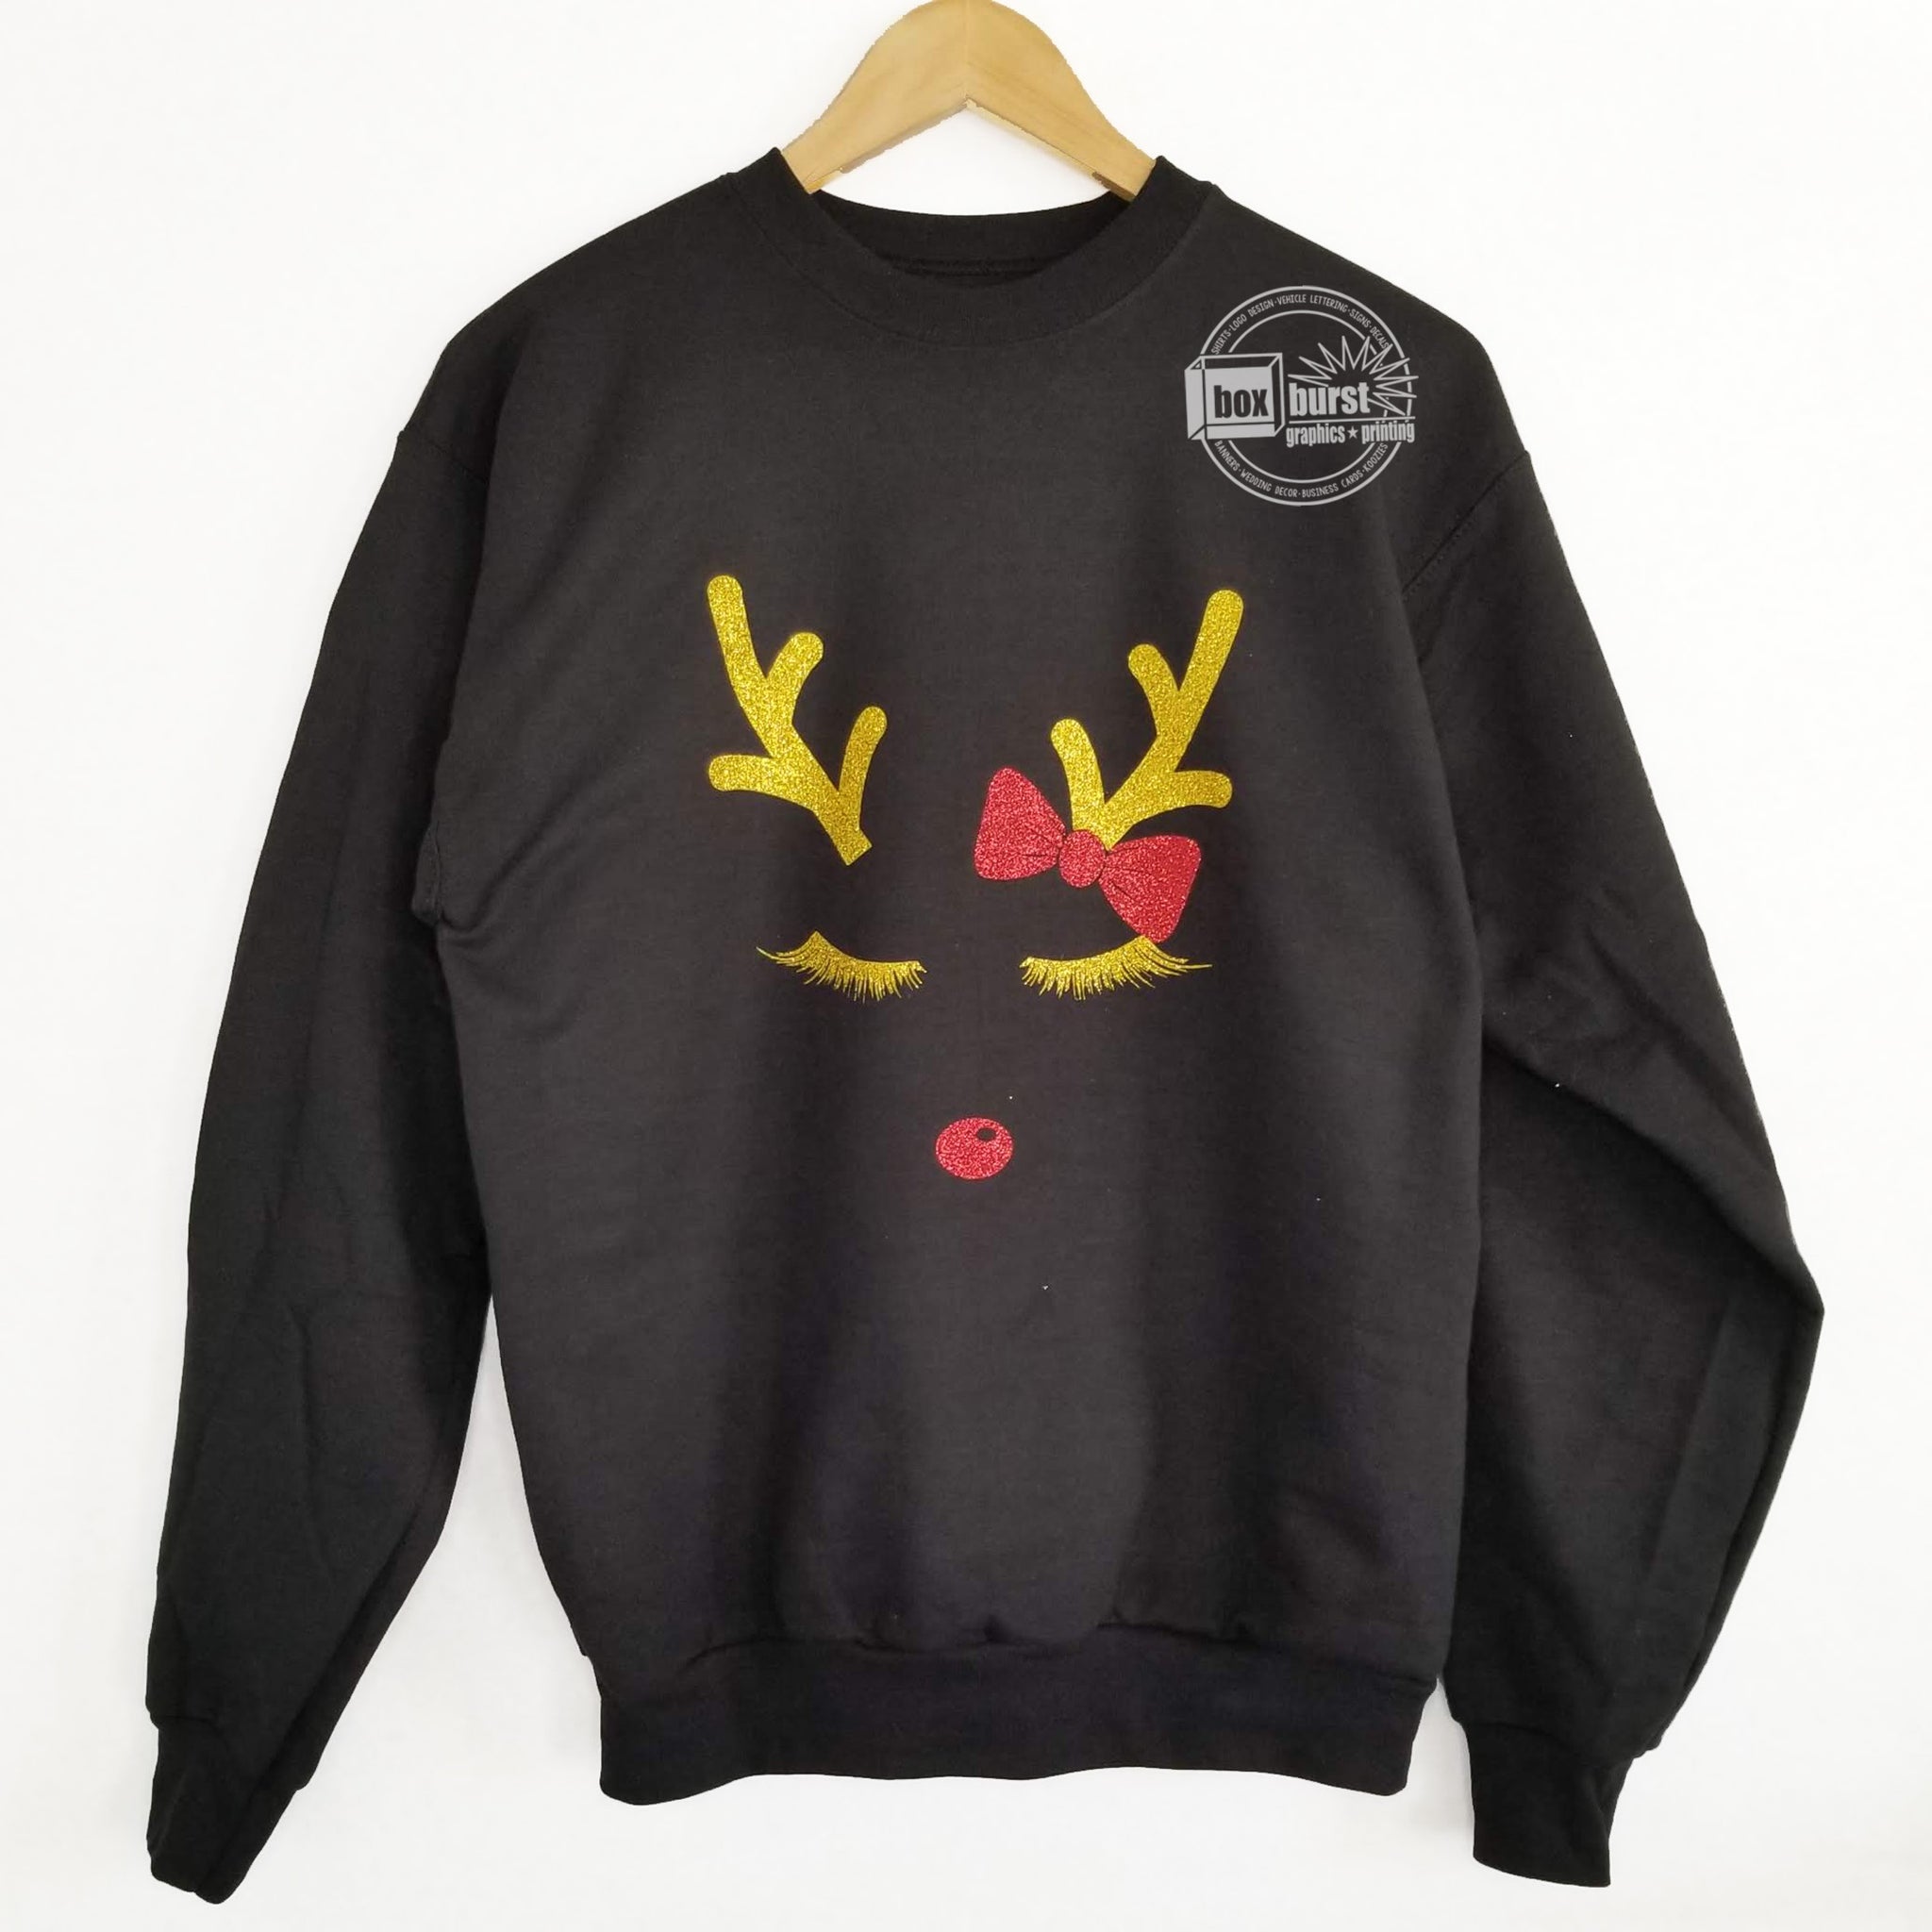 Reindeer sweater with sparkles